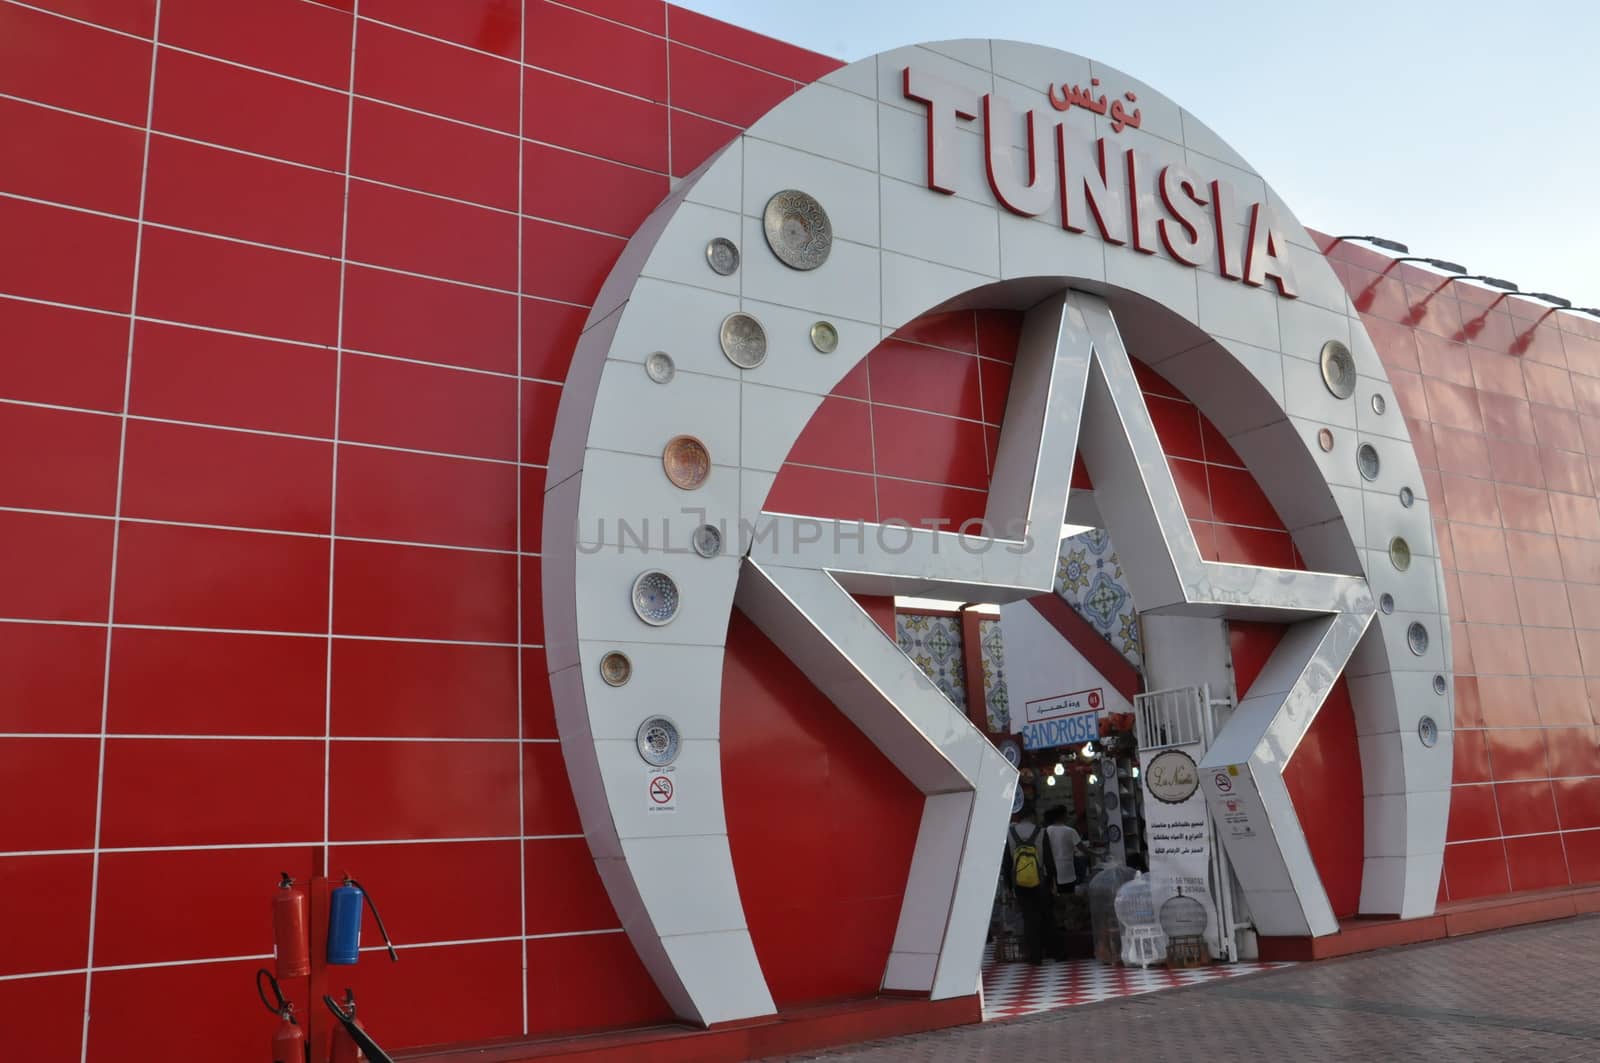 Tunisia pavilion at Global Village in Dubai, UAE. It is claimed to be the world's largest tourism, leisure and entertainment project.